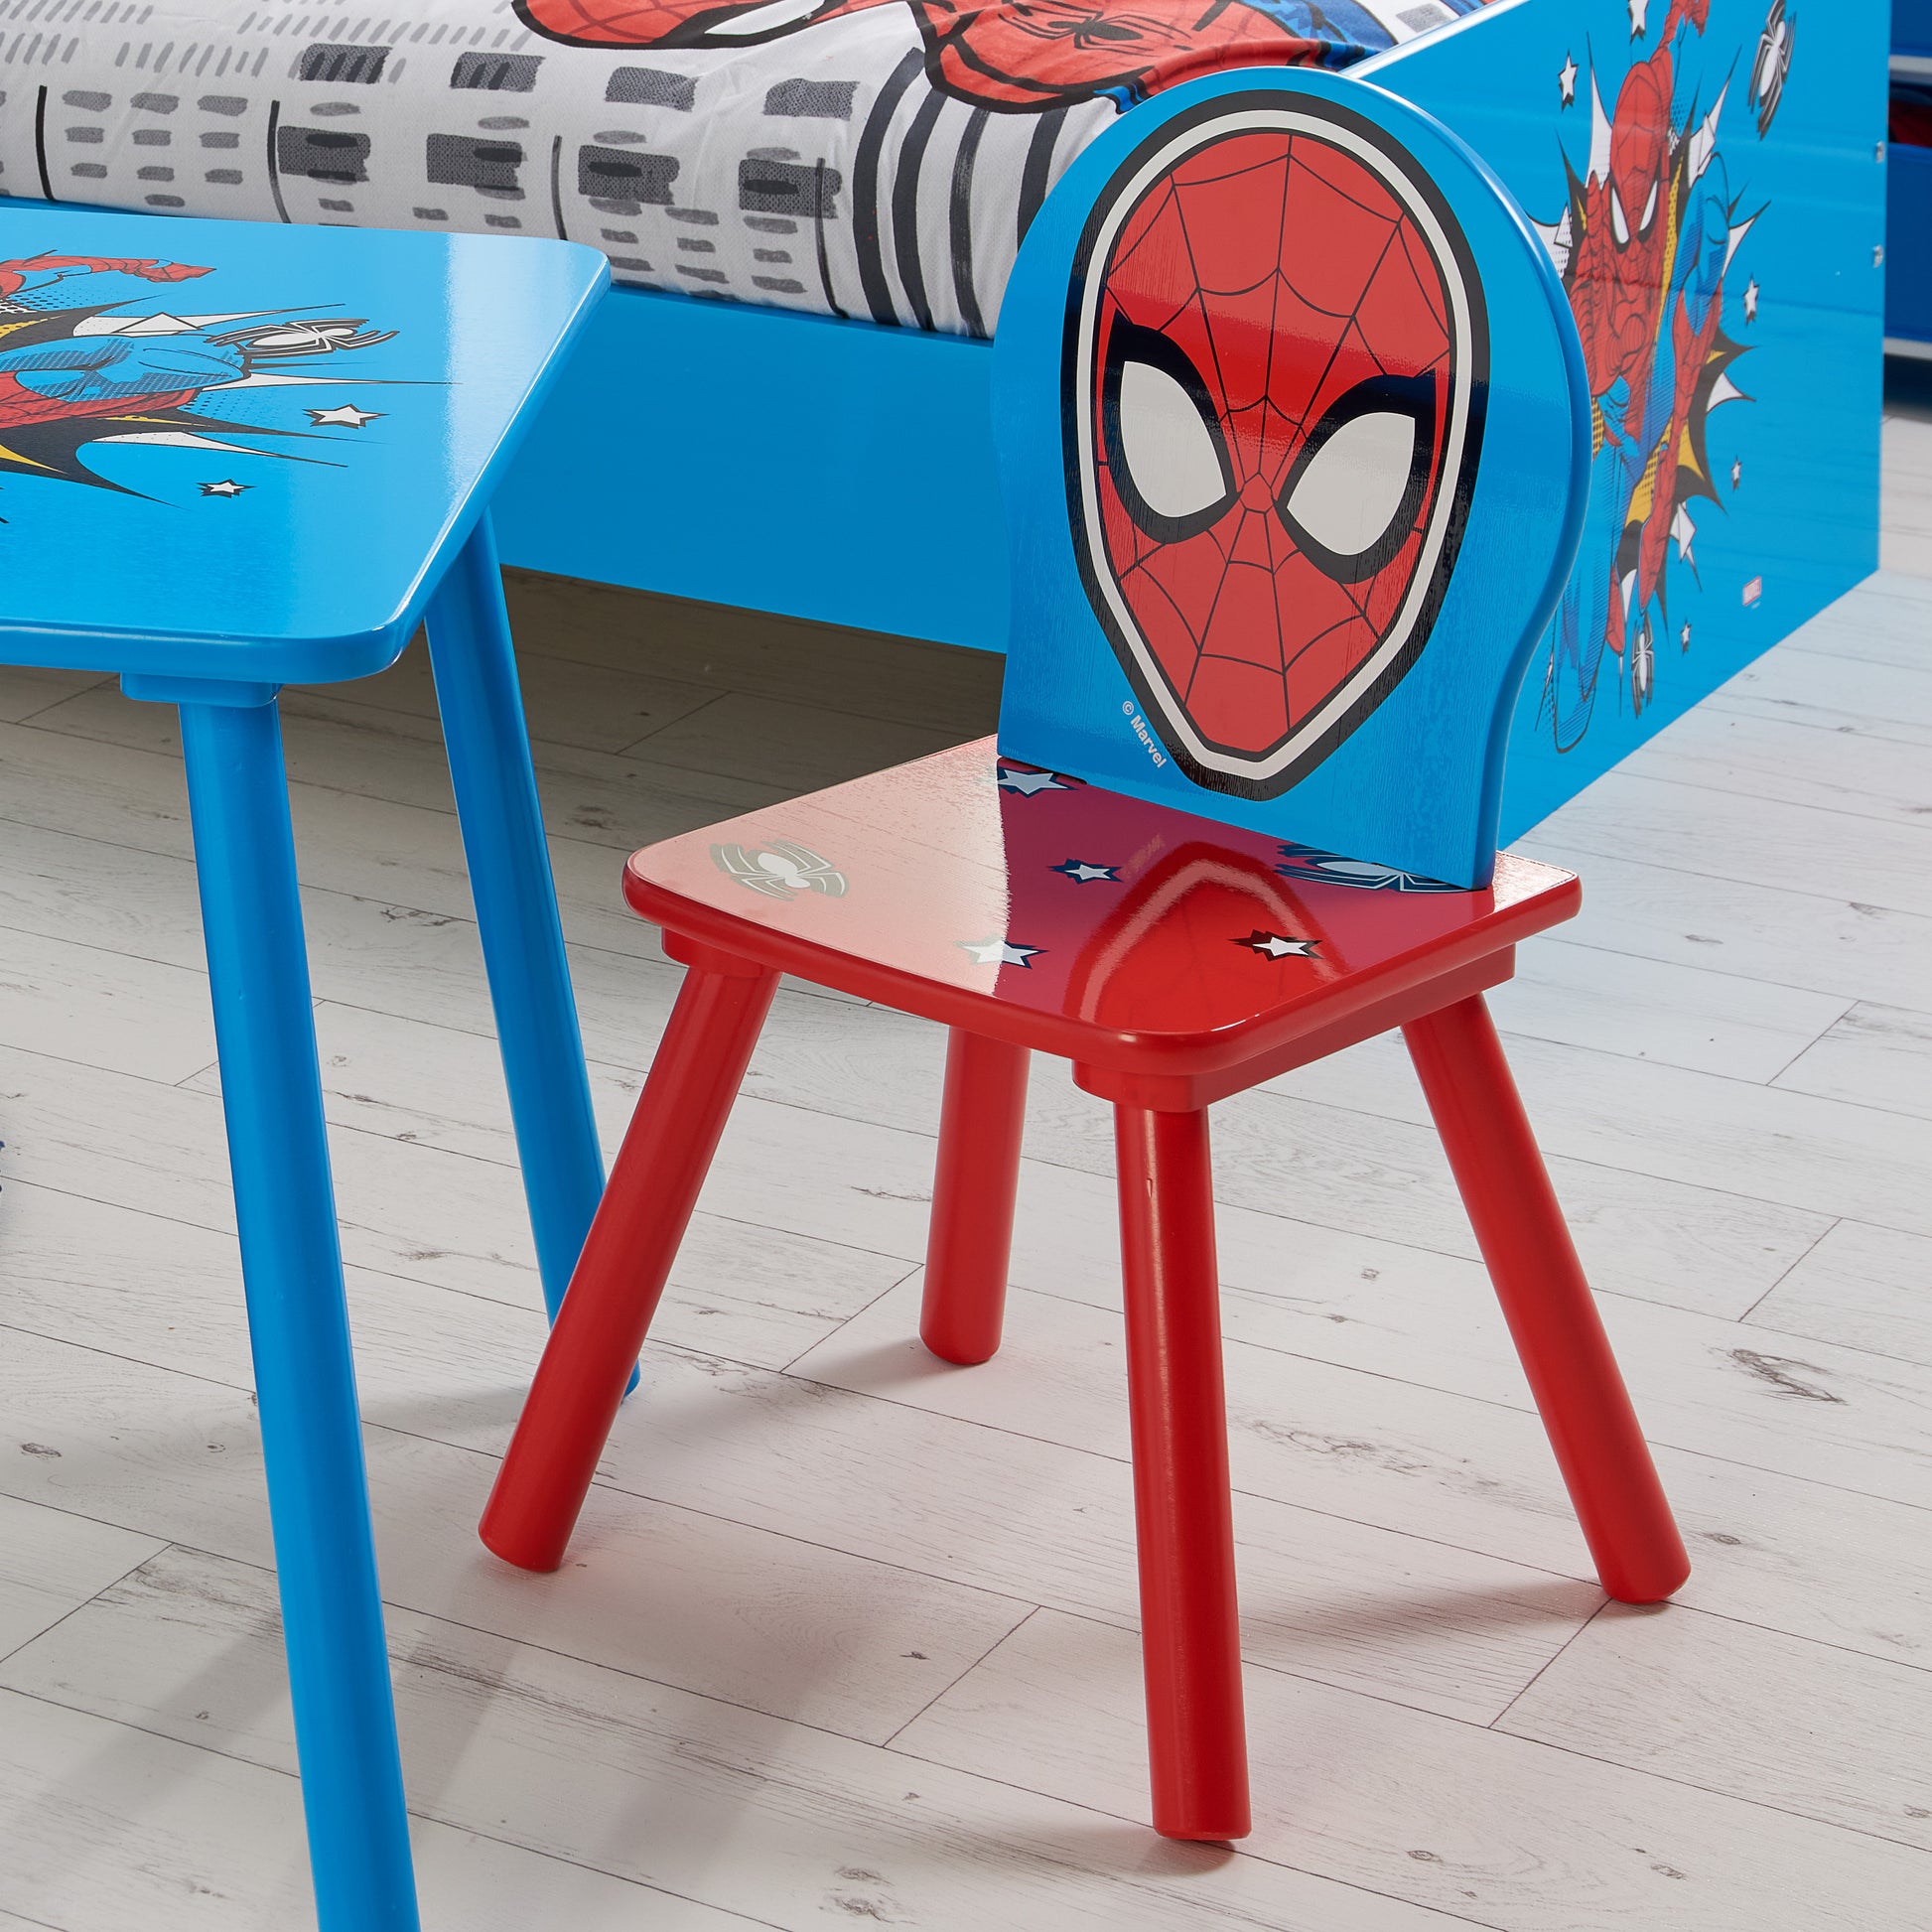 Disney Home - Spider-man Table & Chairs - Kidsly